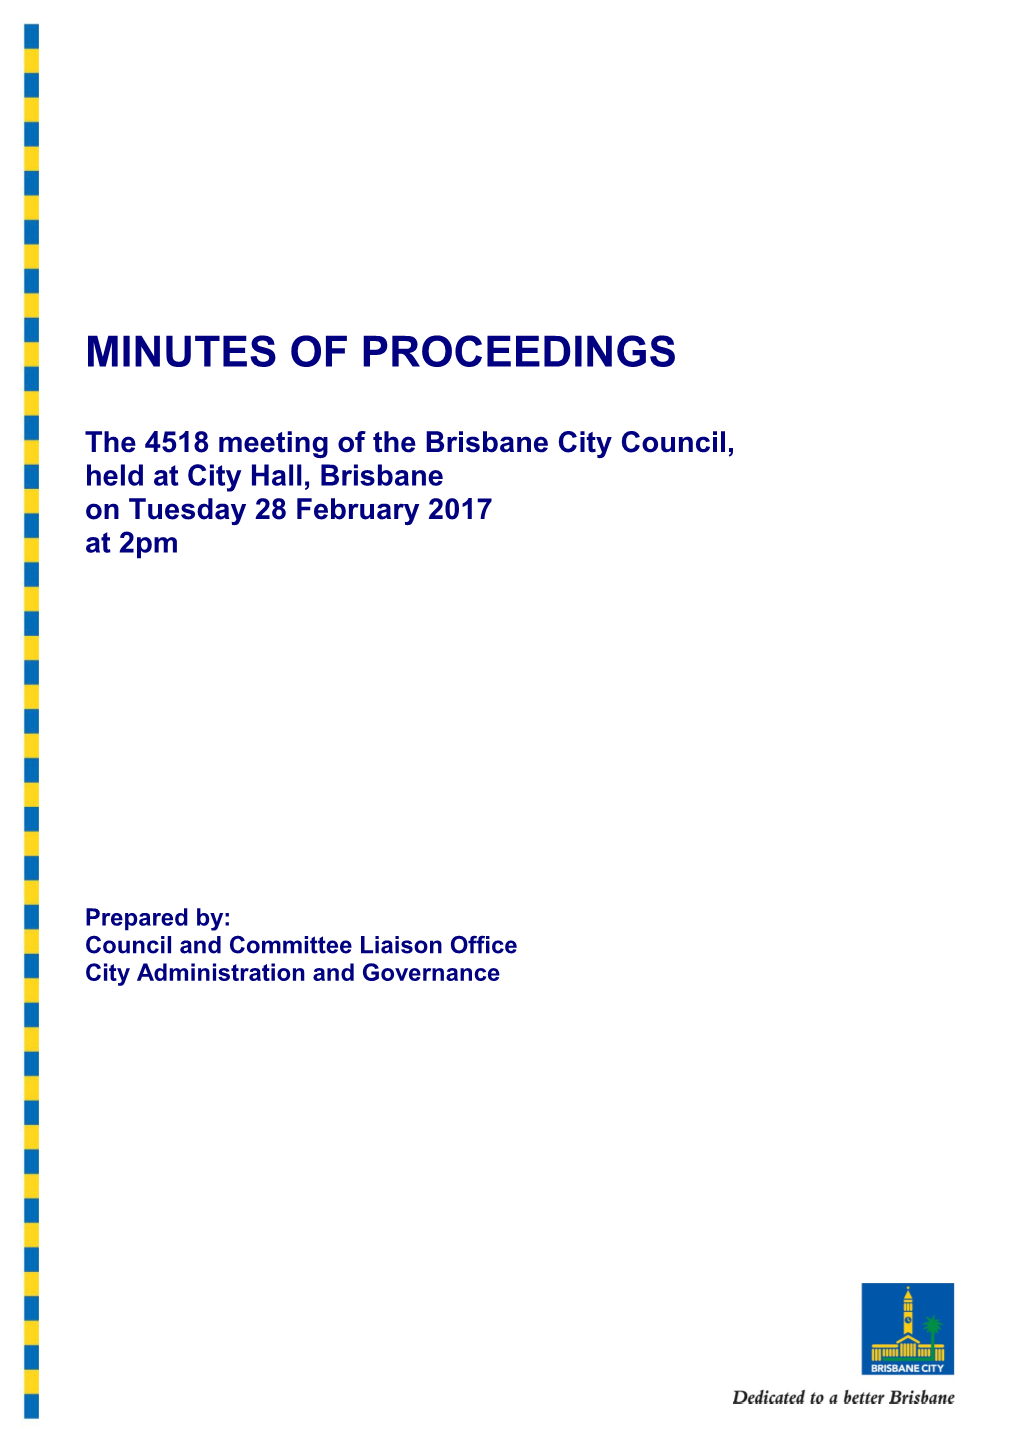 The 4518 Meeting of the Brisbane City Council